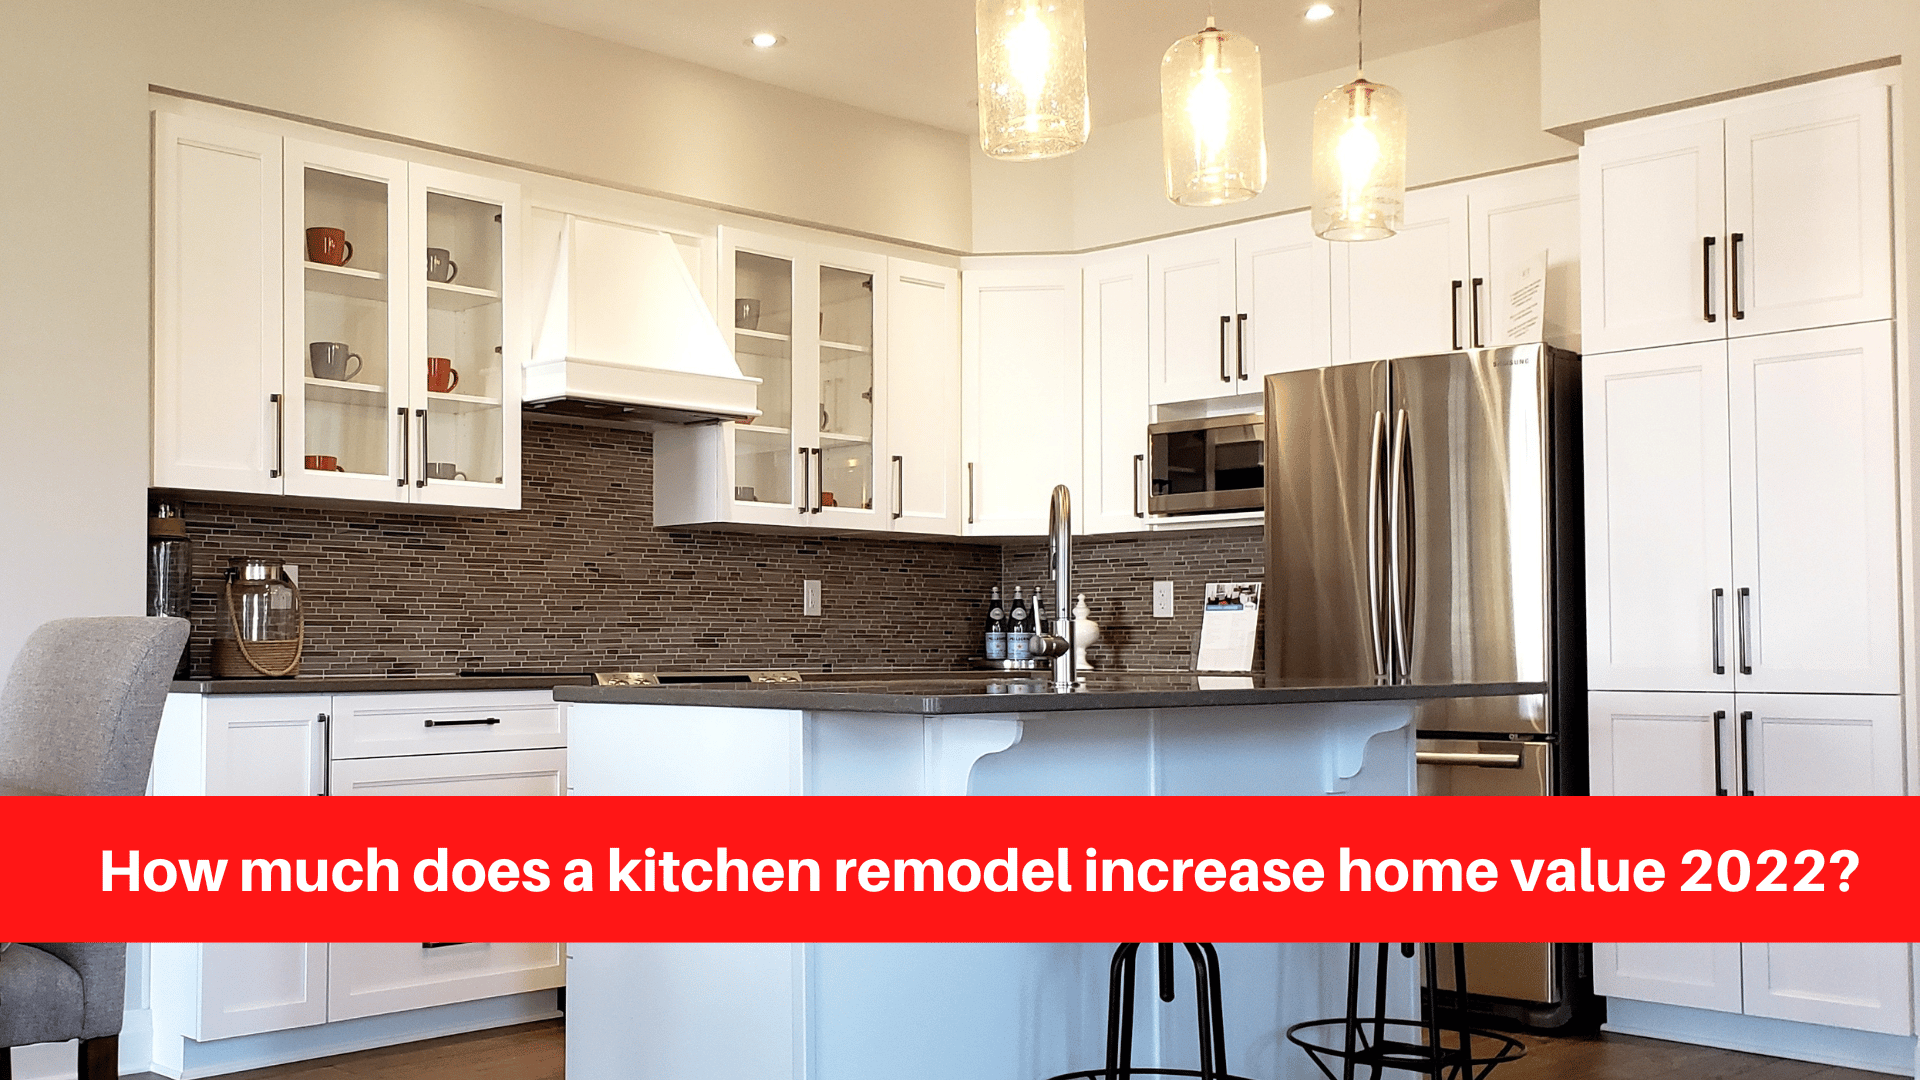 How much does a kitchen remodel increase home value 2022? Burlington